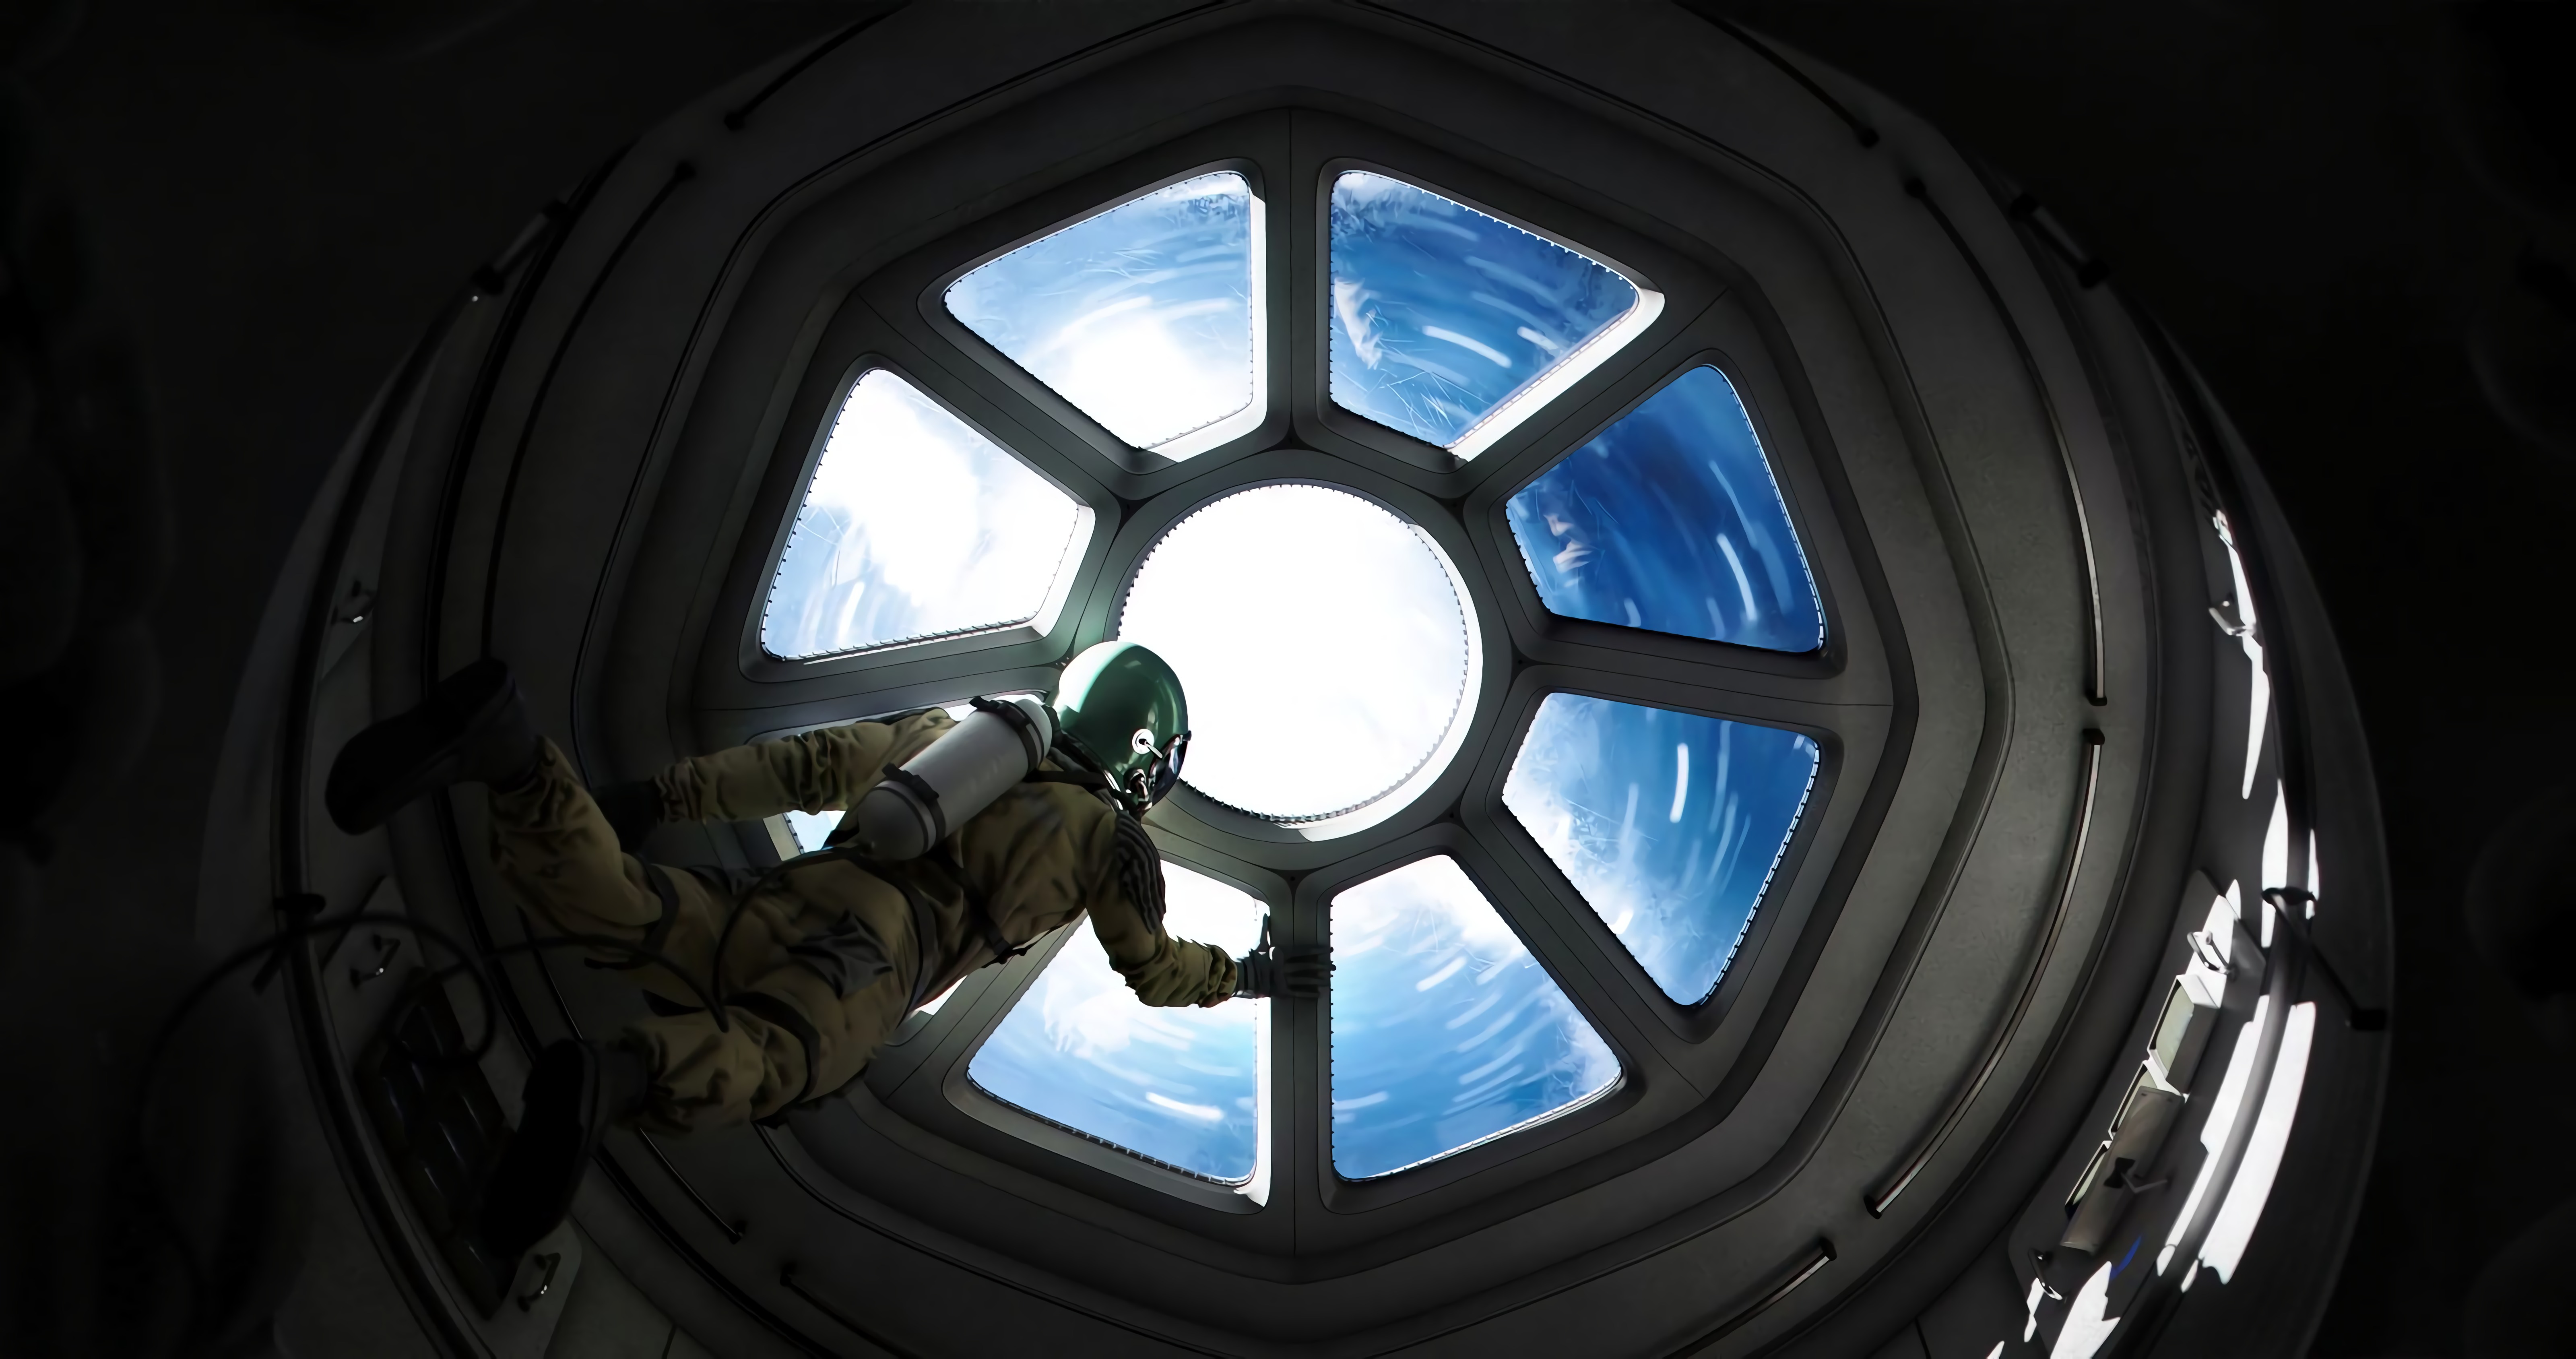 gravity, universe, porthole, spaceship, astronaut, weightlessness wallpapers for tablet